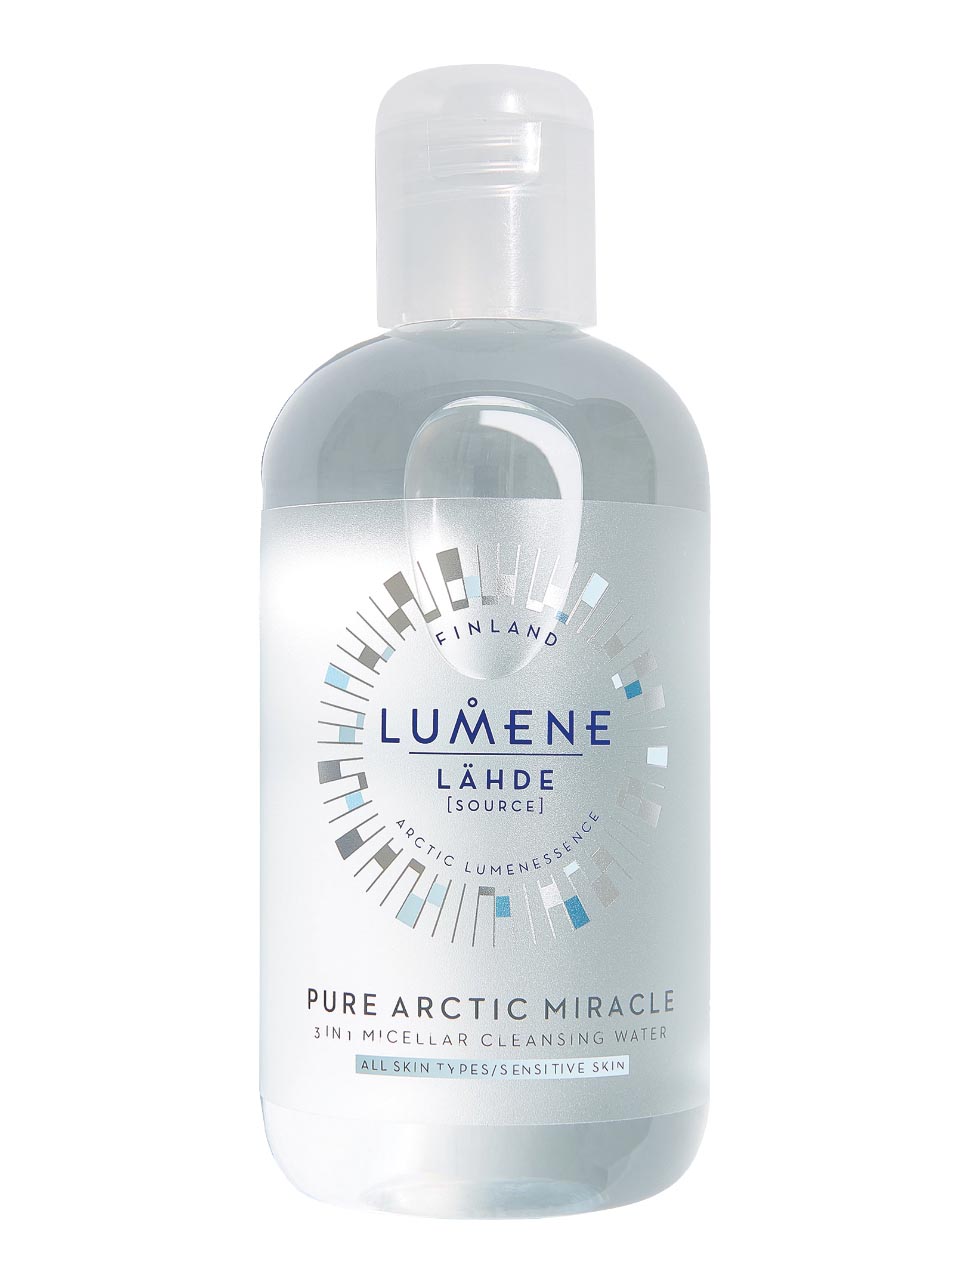 Lumene Nordic Hydra (Lähde) Pure Arctic Miracle 3-in-1 Micellar Cleansing Water 250 ml null - onesize - 1